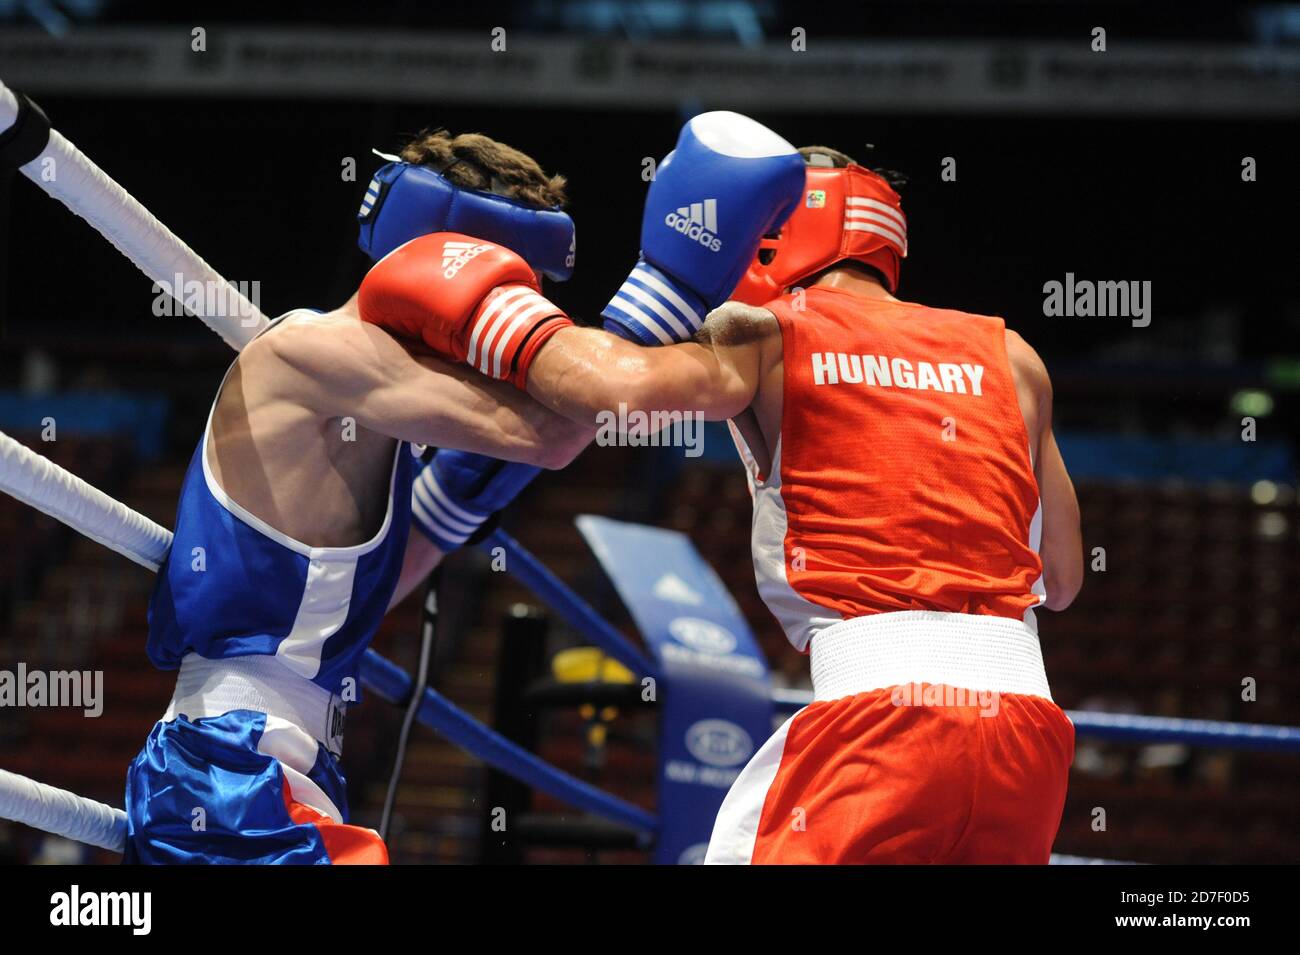 Moscow, Russia. 28th of November, 2013 Boxers fight for the title of world  Champions in the ring in the match of the World Chess Boxing Championship  in Moscow, Russia Stock Photo - Alamy